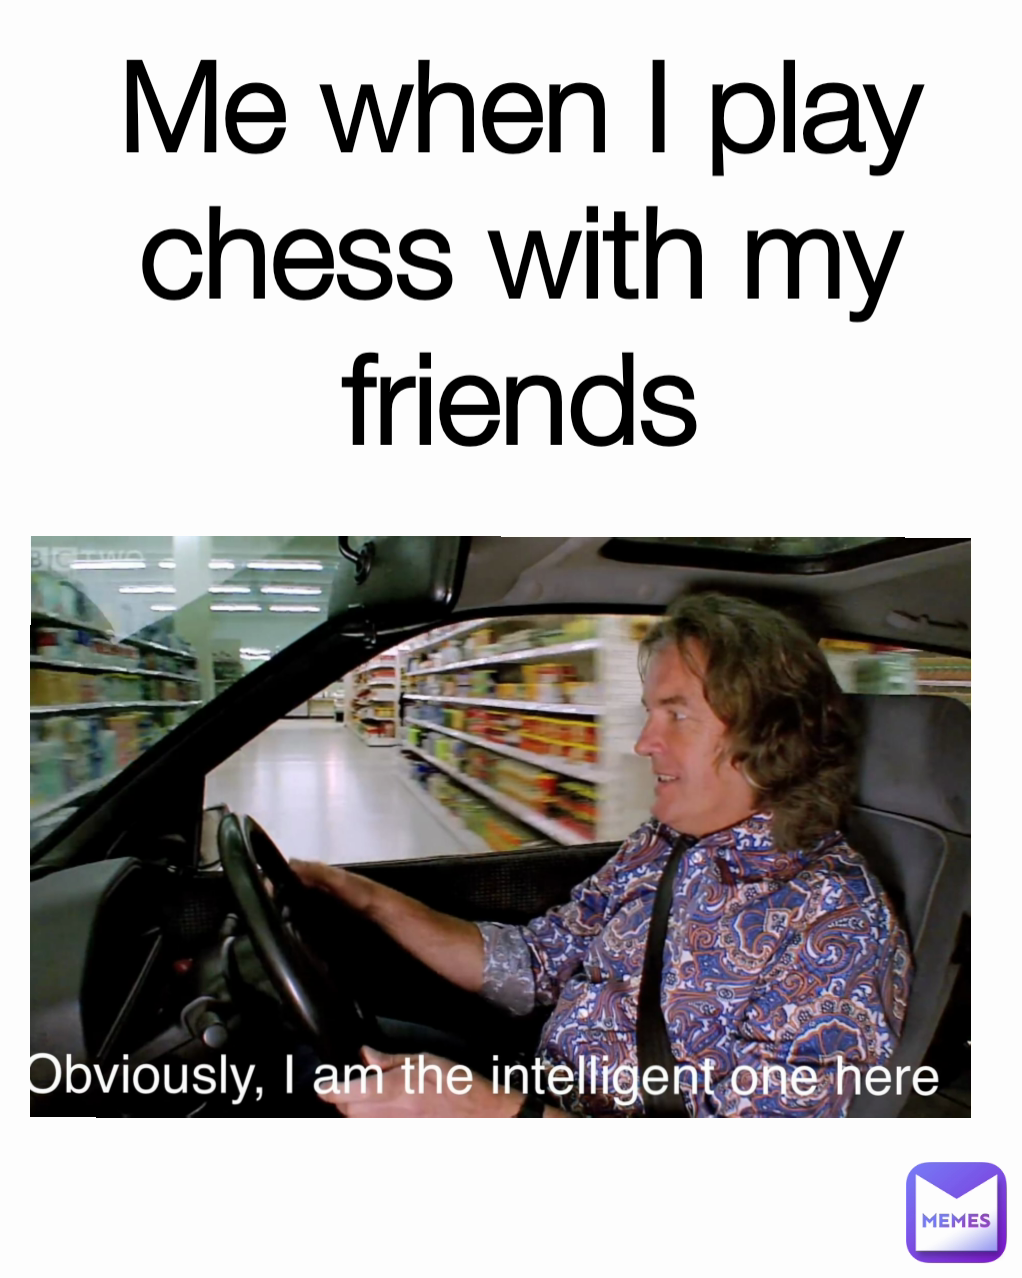 Me when I play chess with my friends
